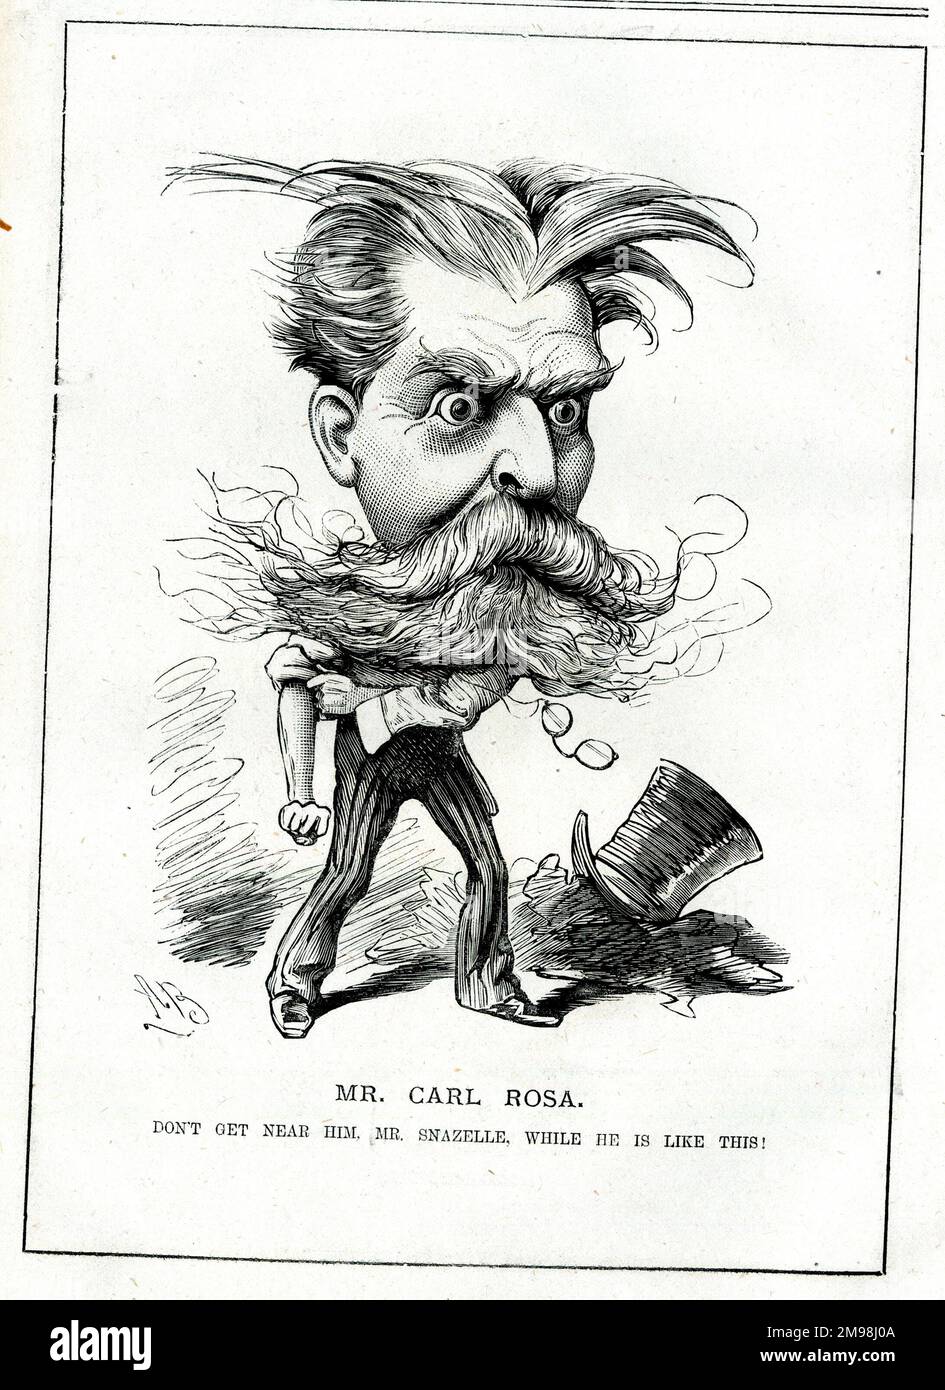 Cartoon, Carl Rosa (1842-1889), German-born musical impresario who founded the Carl Rosa Opera Company. Don't get near him, Mr Snazelle, while he is like this! Stock Photo